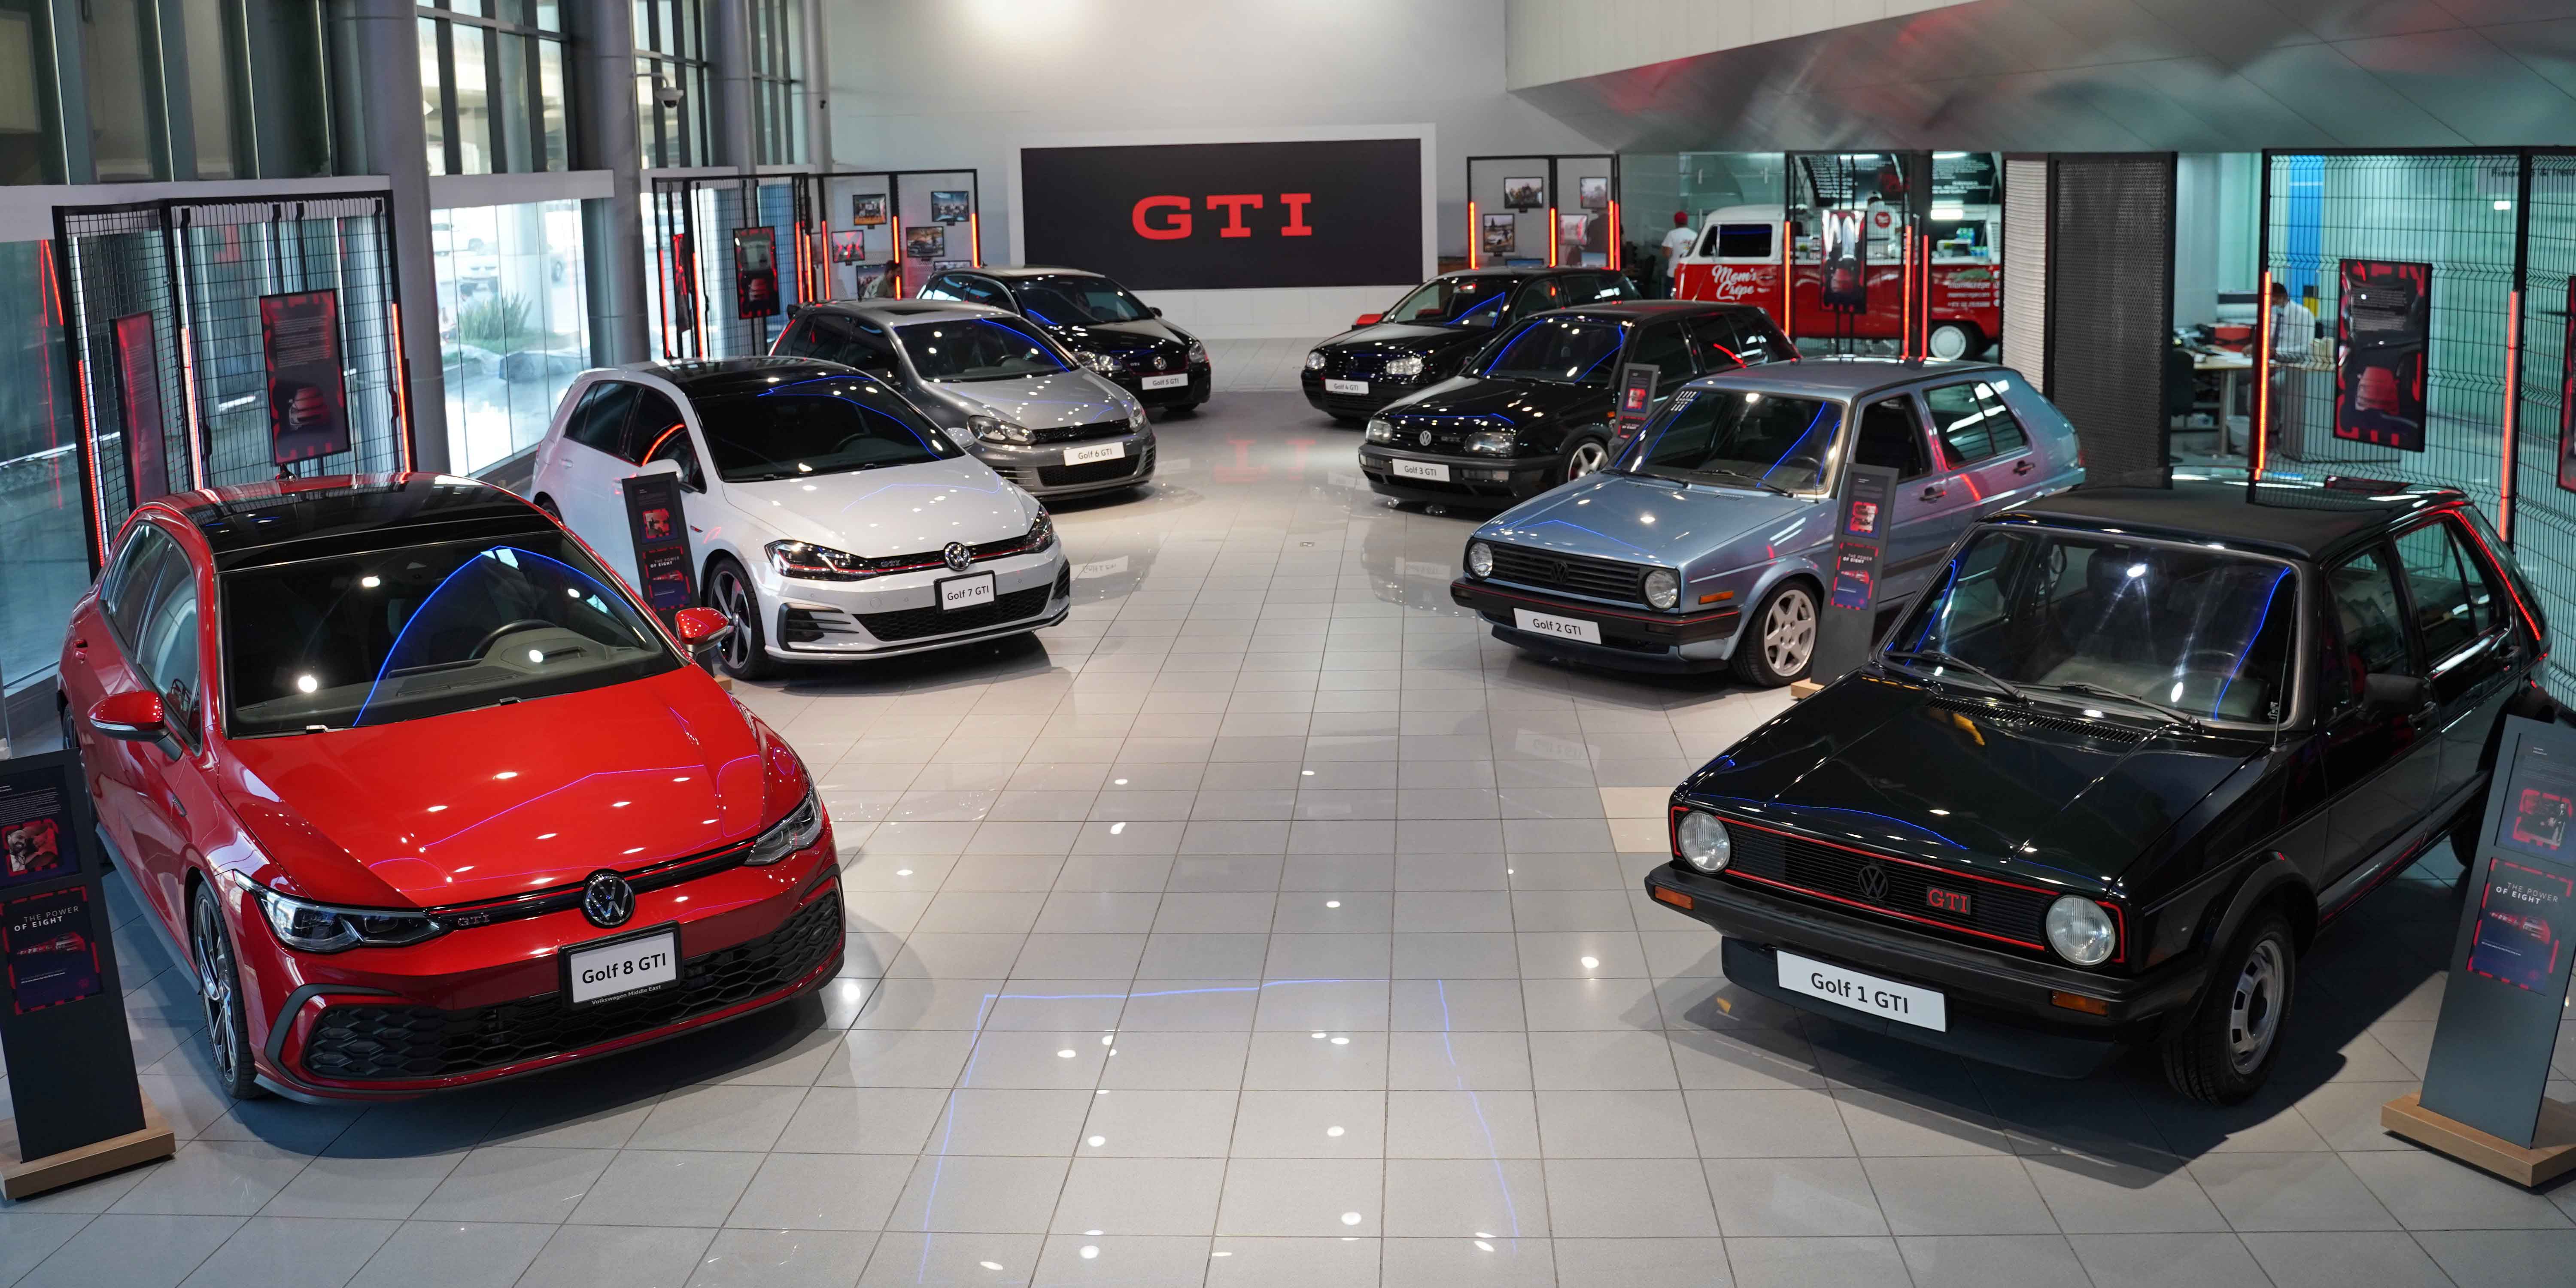 Volkswagen celebrates 45 years of Golf GTI with a special exhibit showcasing the evolution of the iconic hatch